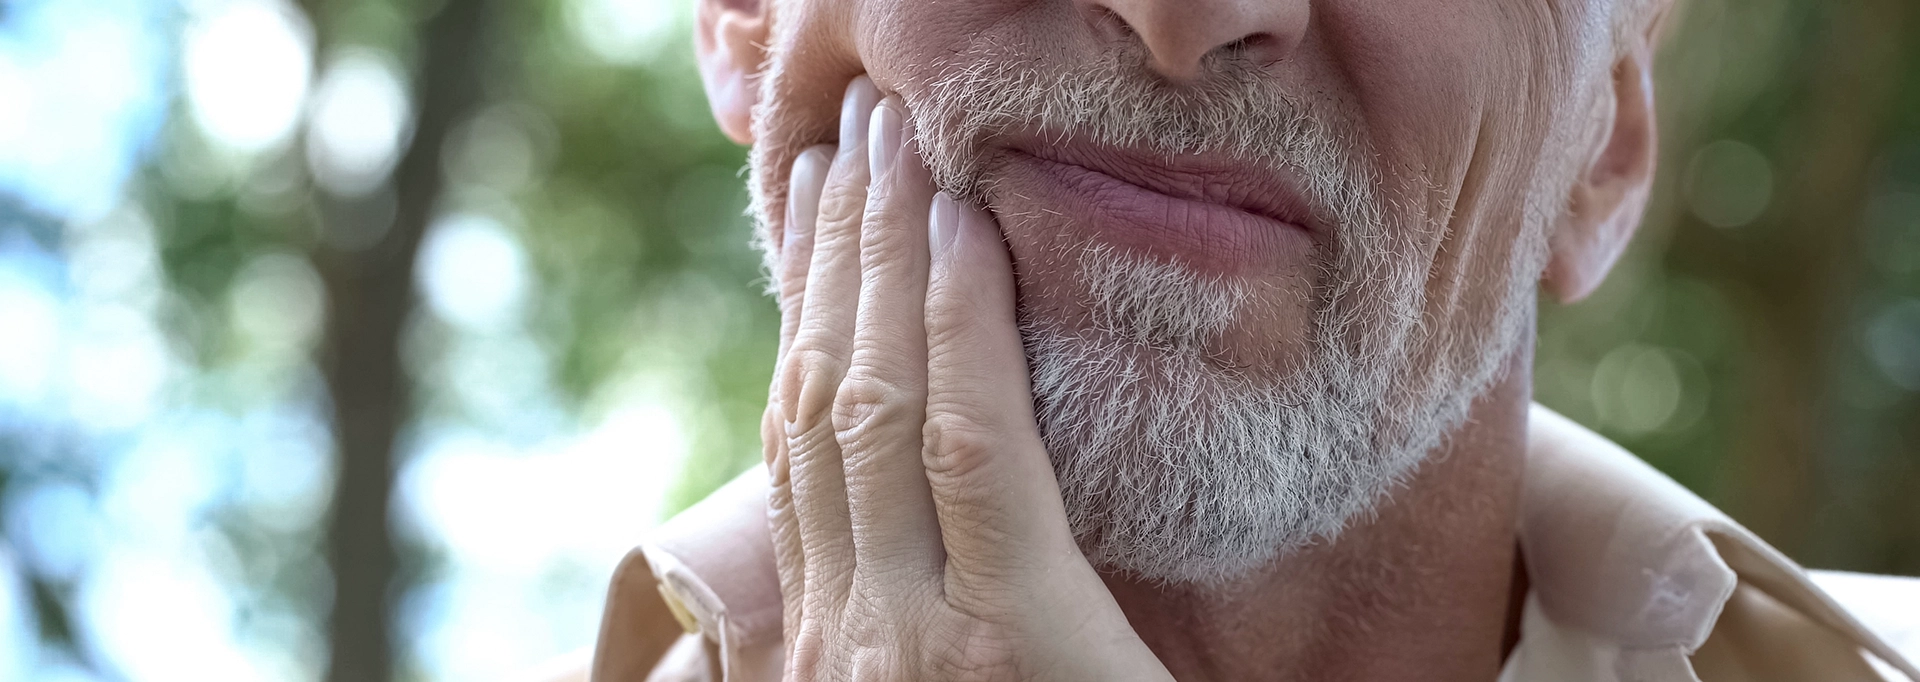 senior man holding jaw in pain-cropped